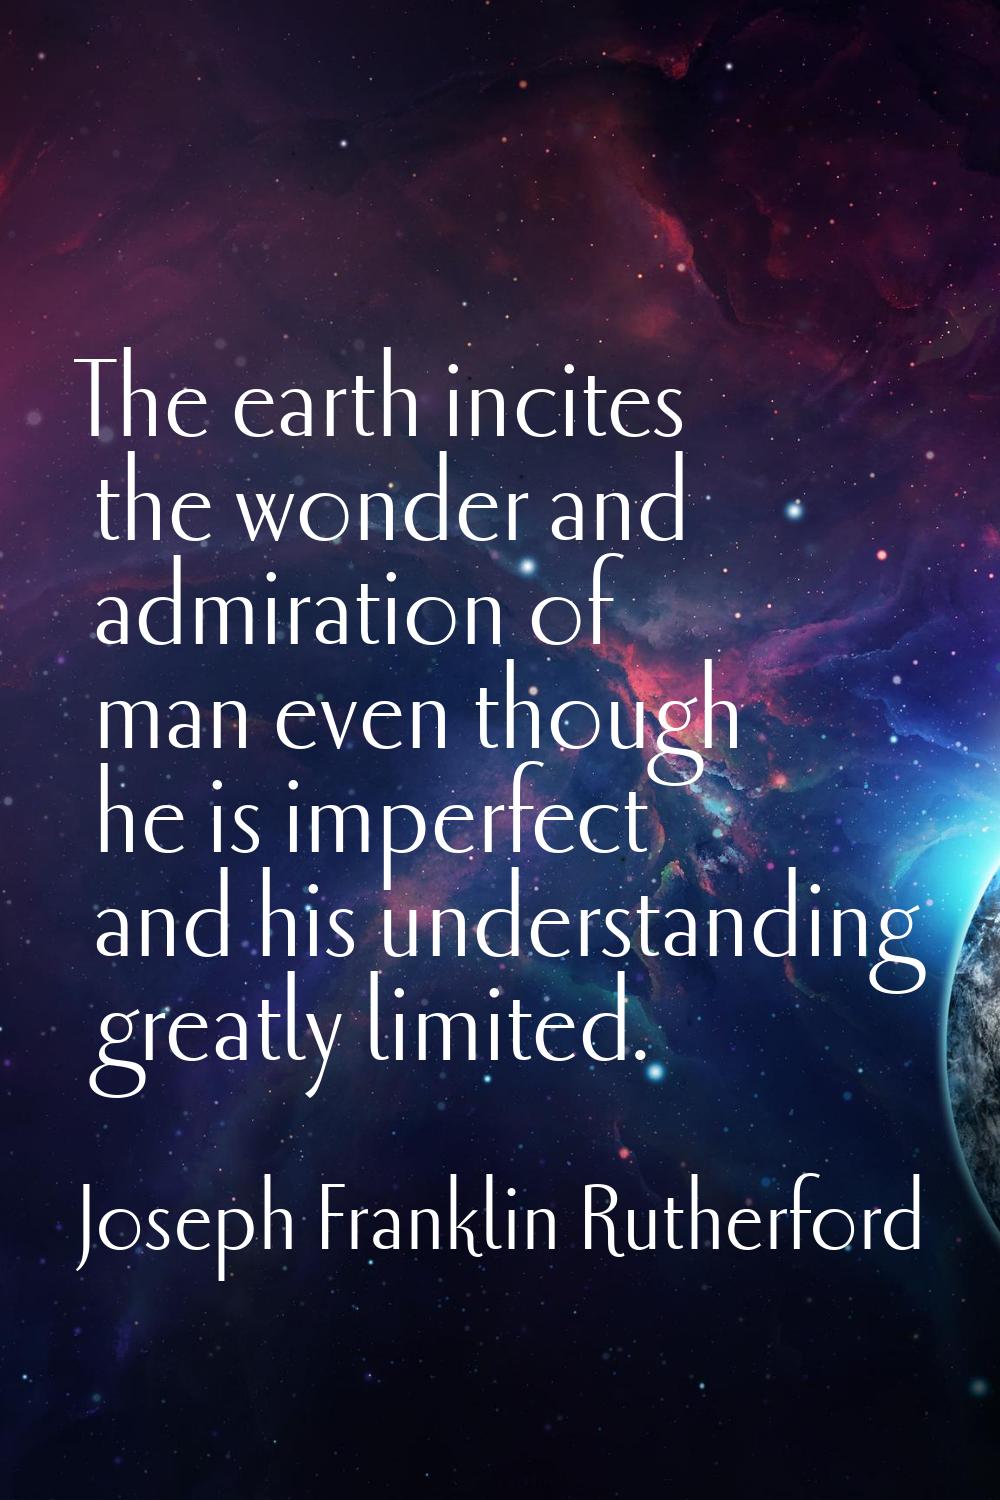 The earth incites the wonder and admiration of man even though he is imperfect and his understandin